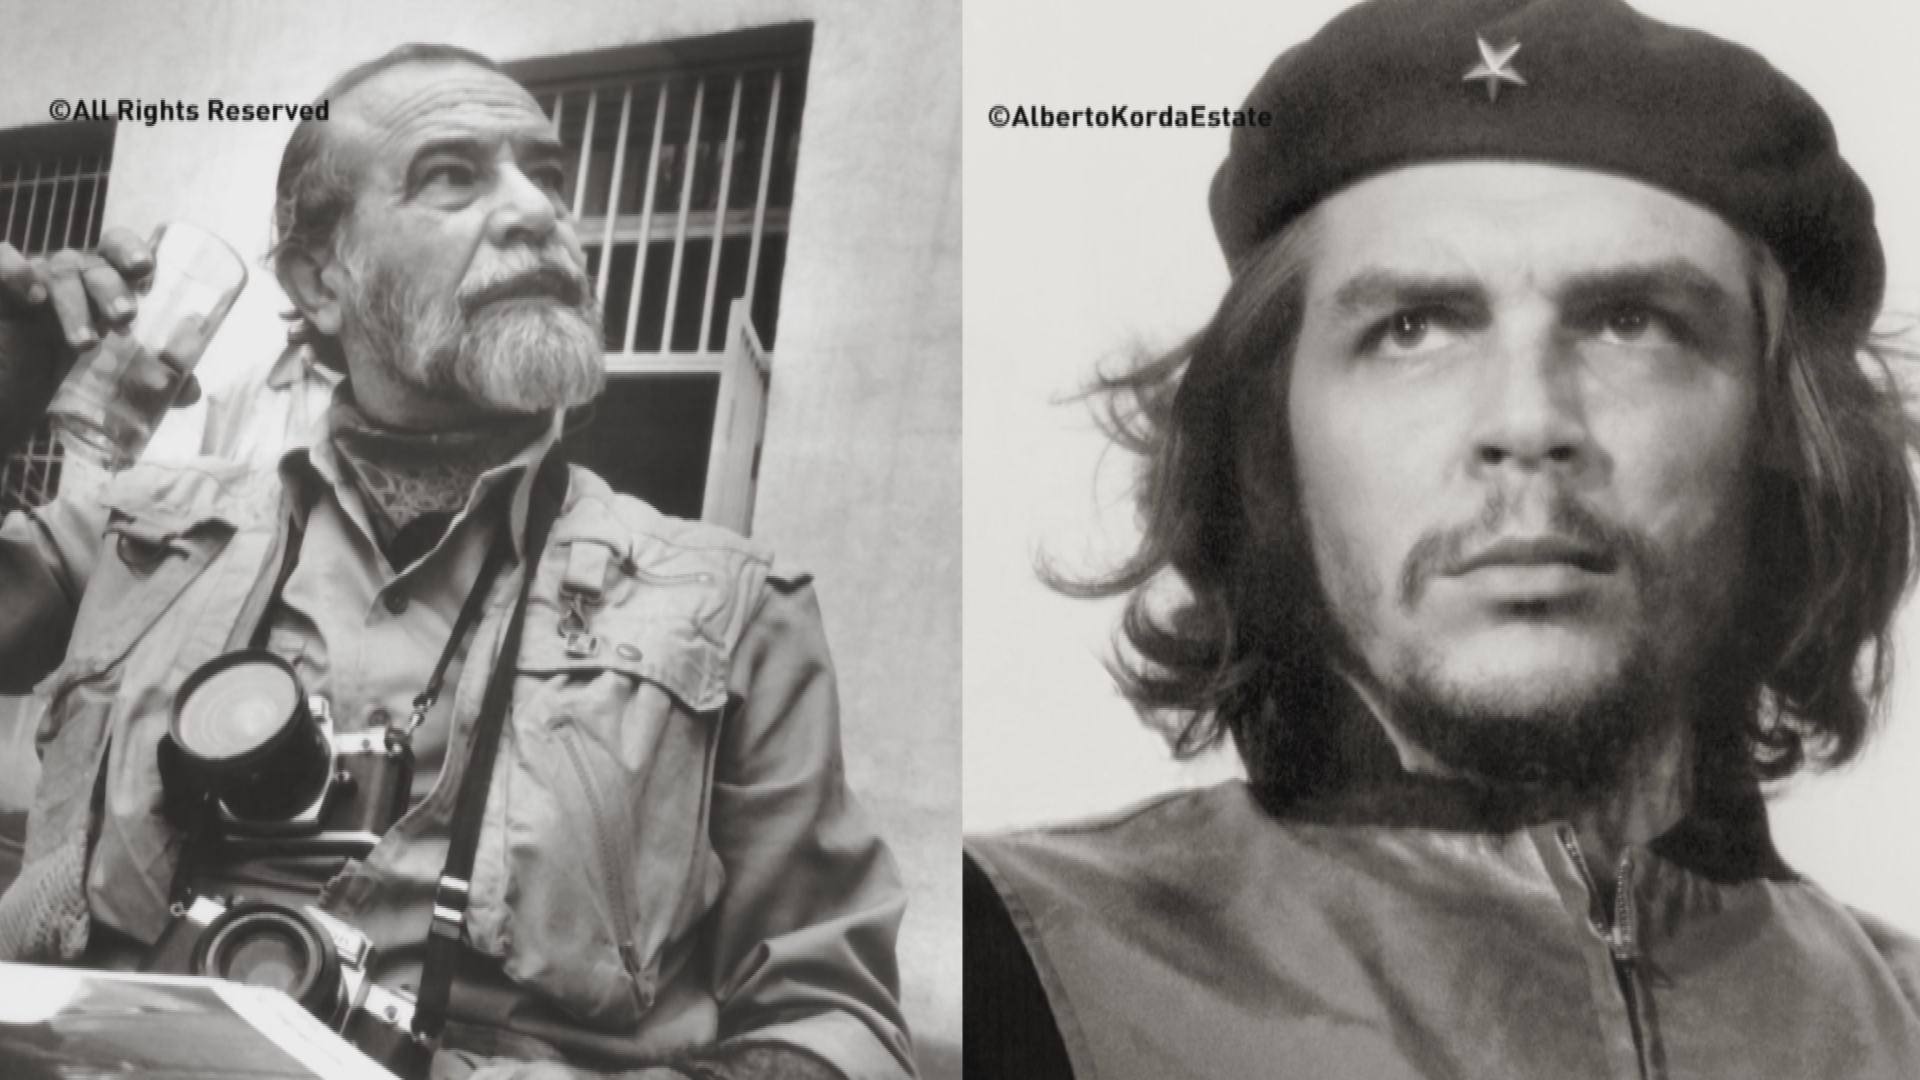 The Cuban photographer who snapped the iconic image of Che Guevara